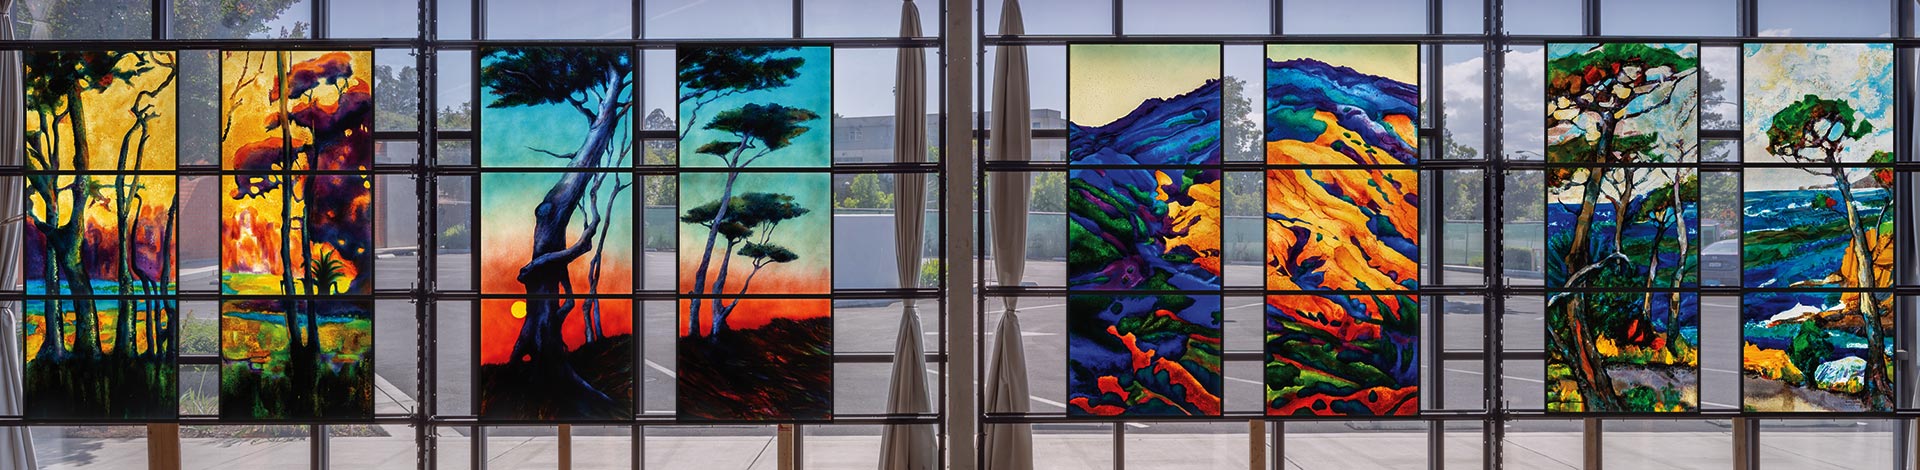 Warner Art Glass Center  The Destination for Stained Glass